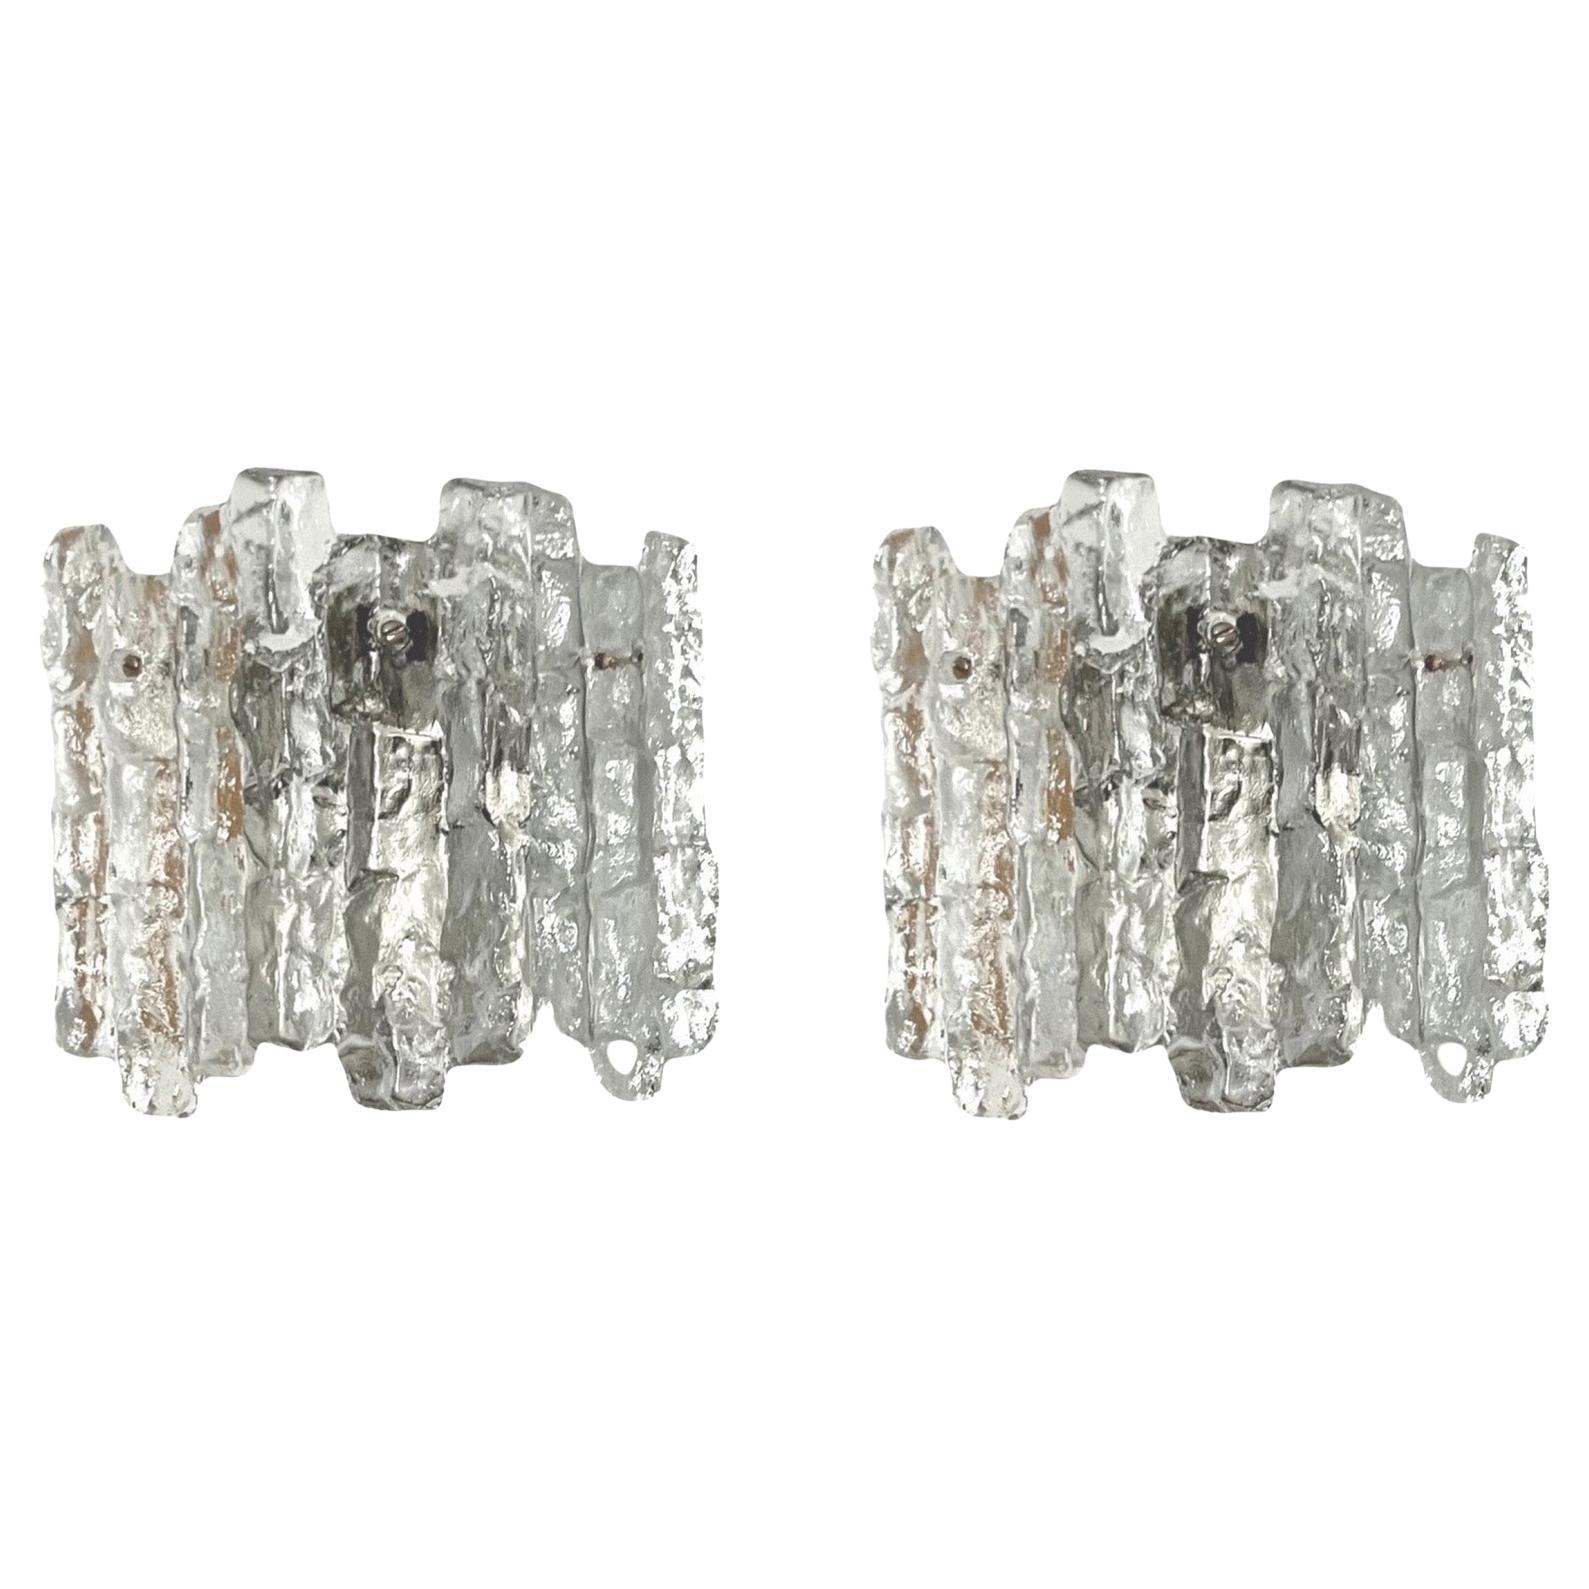 Austrian Midcentury "Sierra" Ice-Glass Pair of Wall Sconces by Kalmar, 1970s For Sale